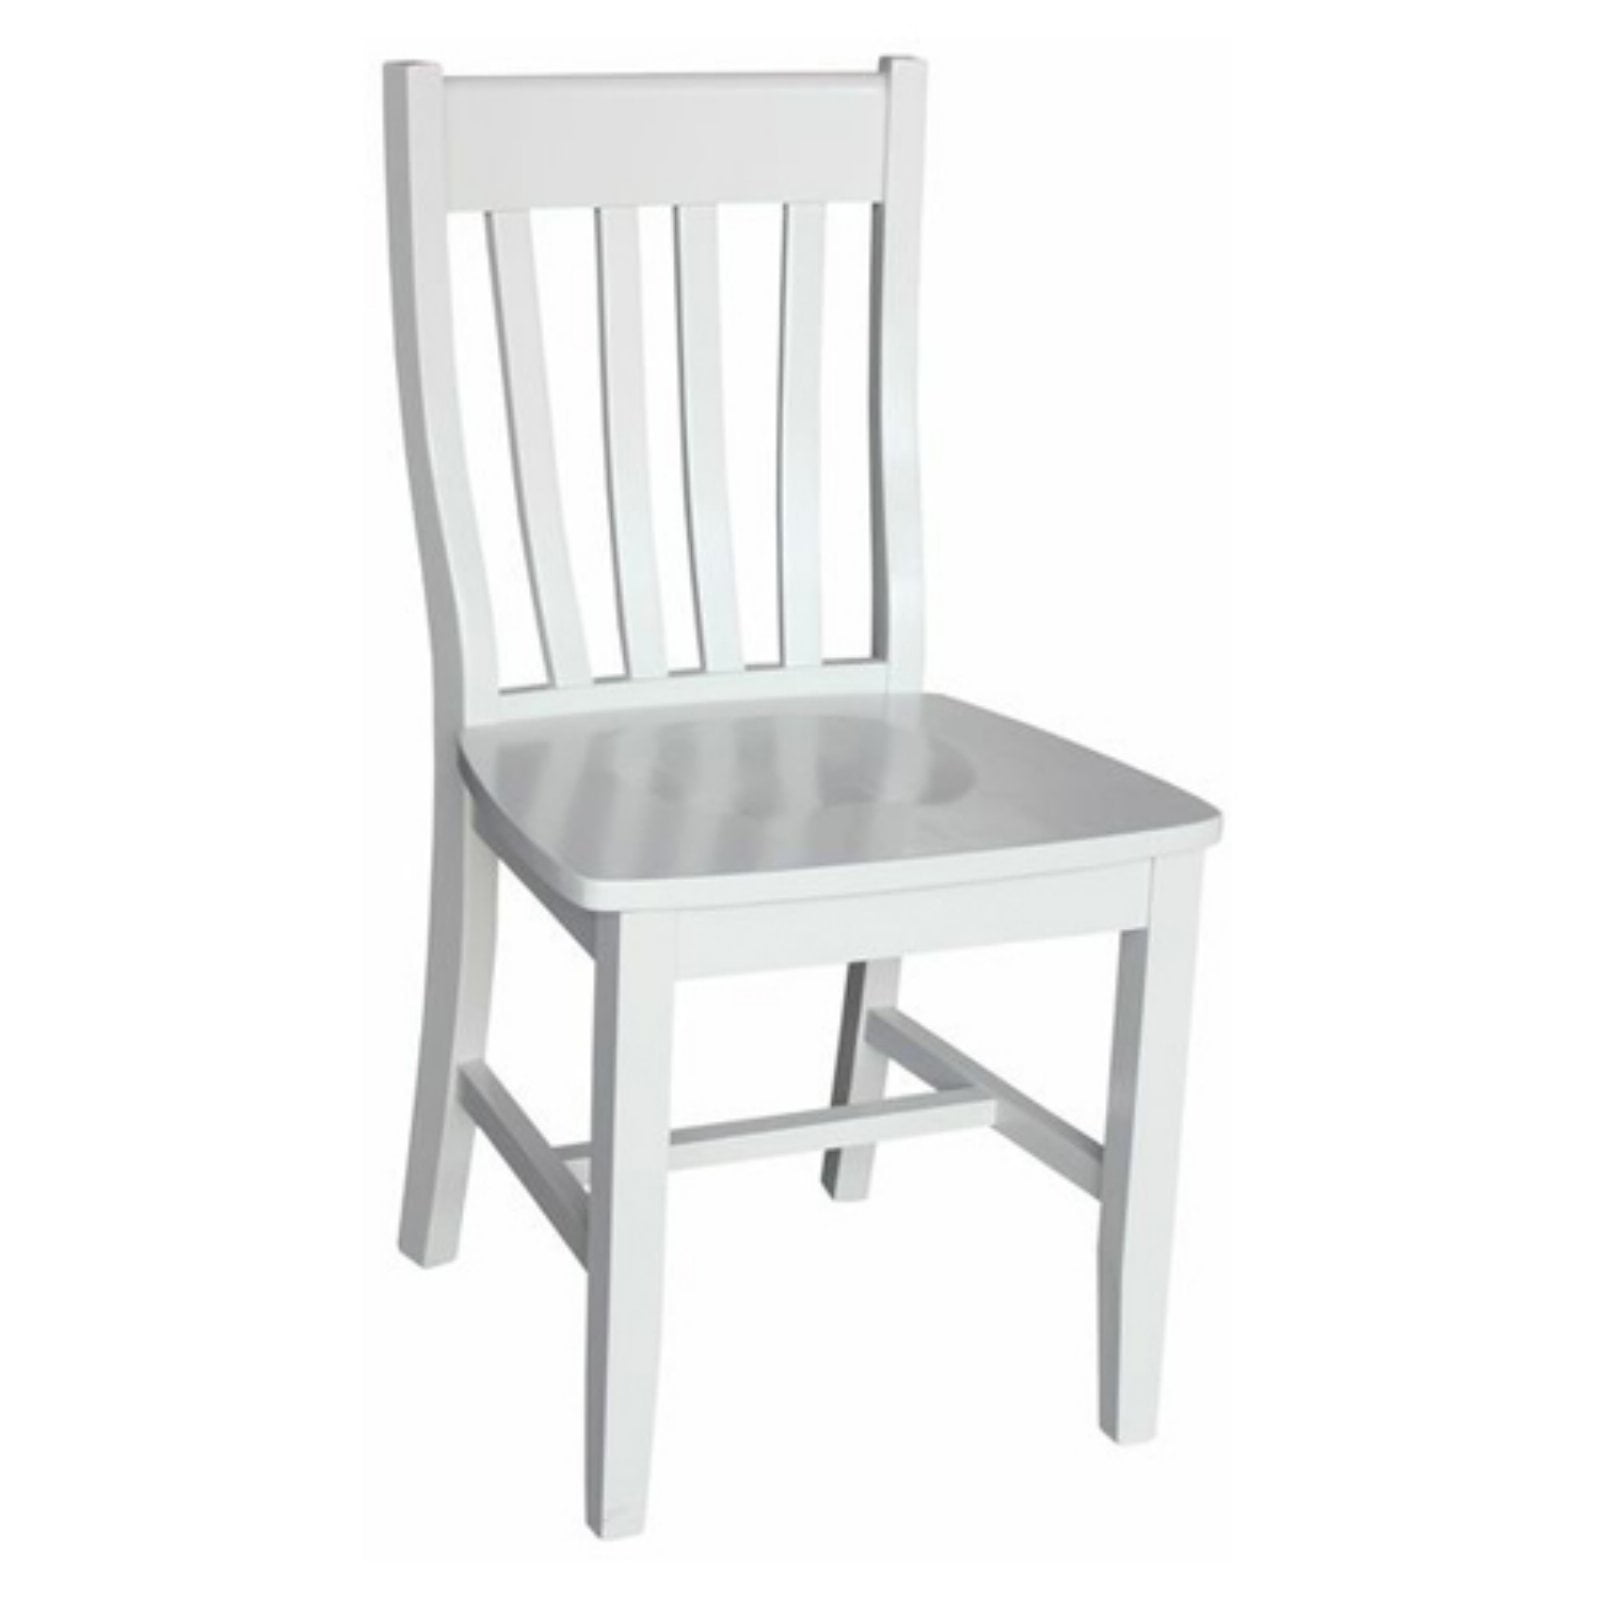 International Concepts Cafe Chairs, Set of 2, Multiple Colors - Walmart.com